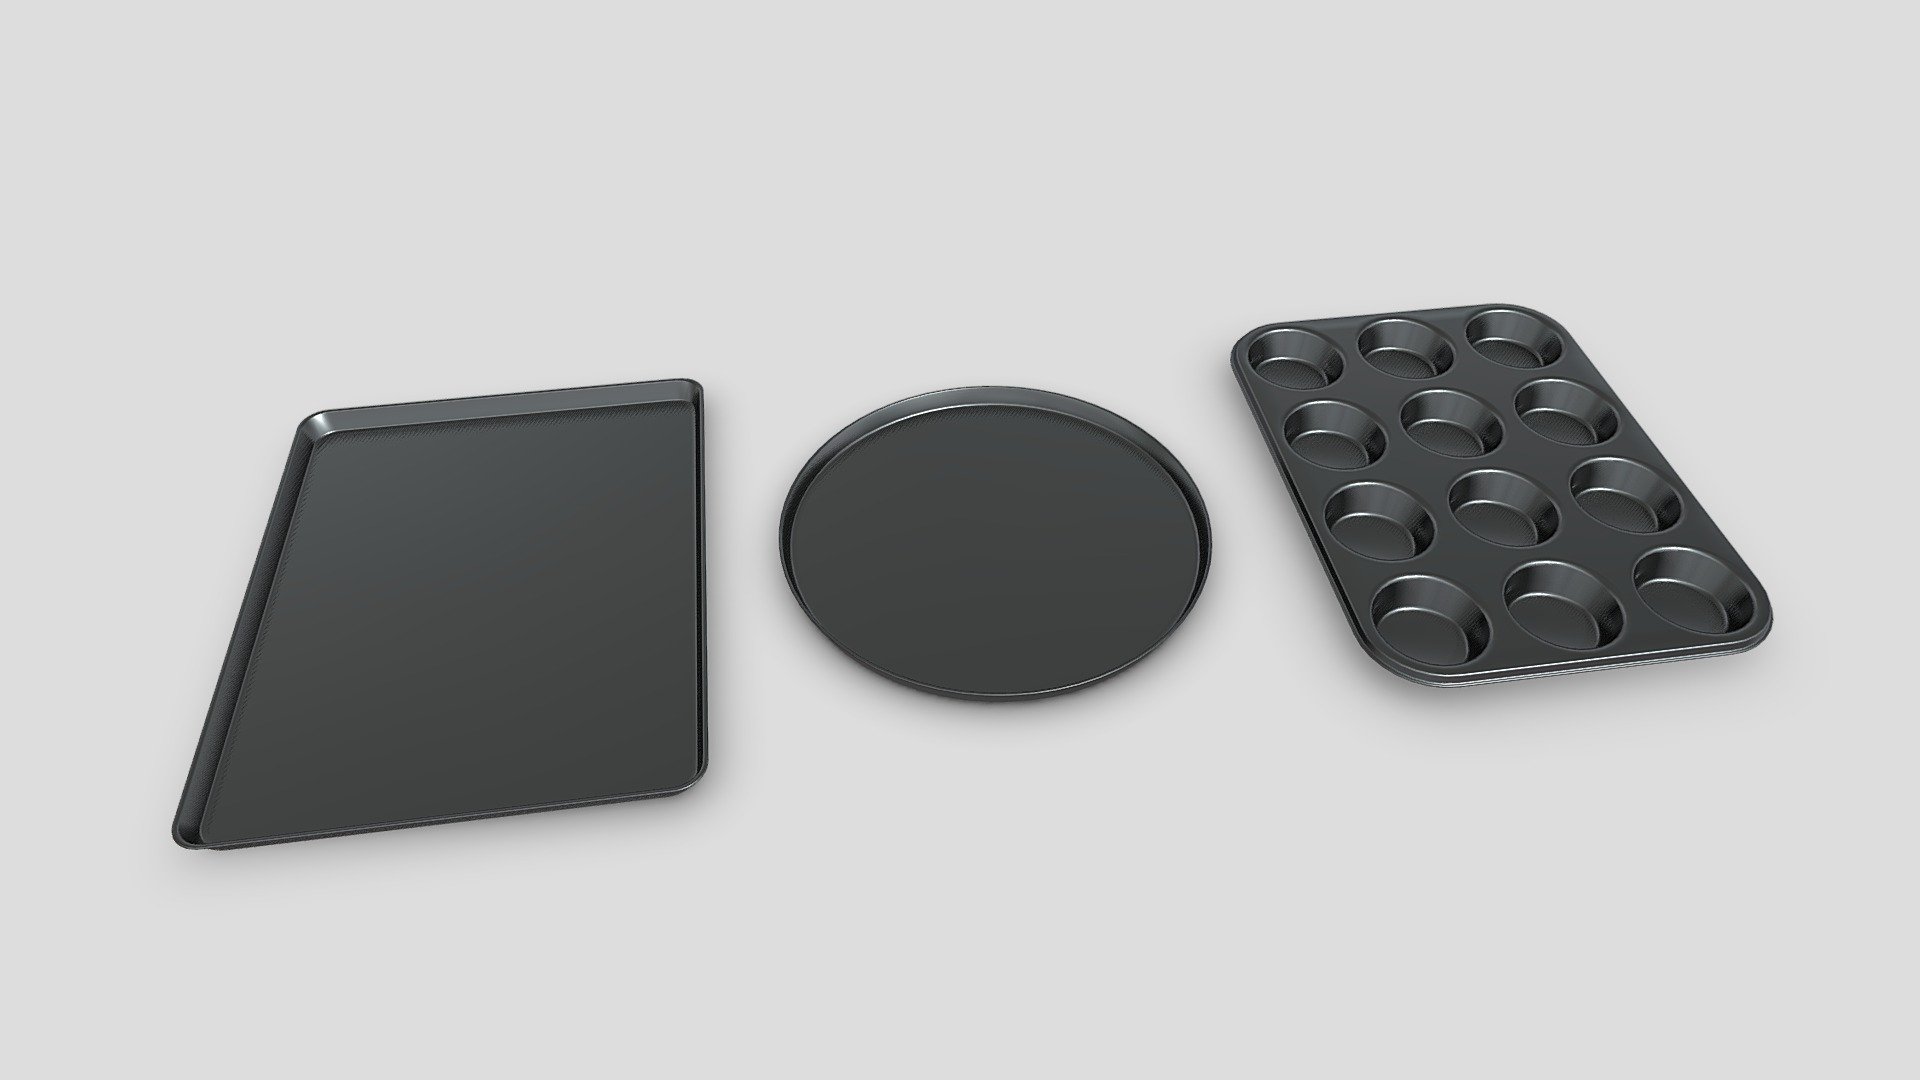 Three baking trays: circular, rectangular, and a muffin tray. approx. 30-40cm each


Quads and tris
Smooth shading with custom normal data (split normals)
Modelled to real-world scale, units: metres
Each tray is a single object with a single watertight mesh.
UV data included, no textures. Basic metal material setup only.

Created in Blender. .blend file includes a HDRI from PolyHaven packed (embedded in the file), licensed under CC0 3d model